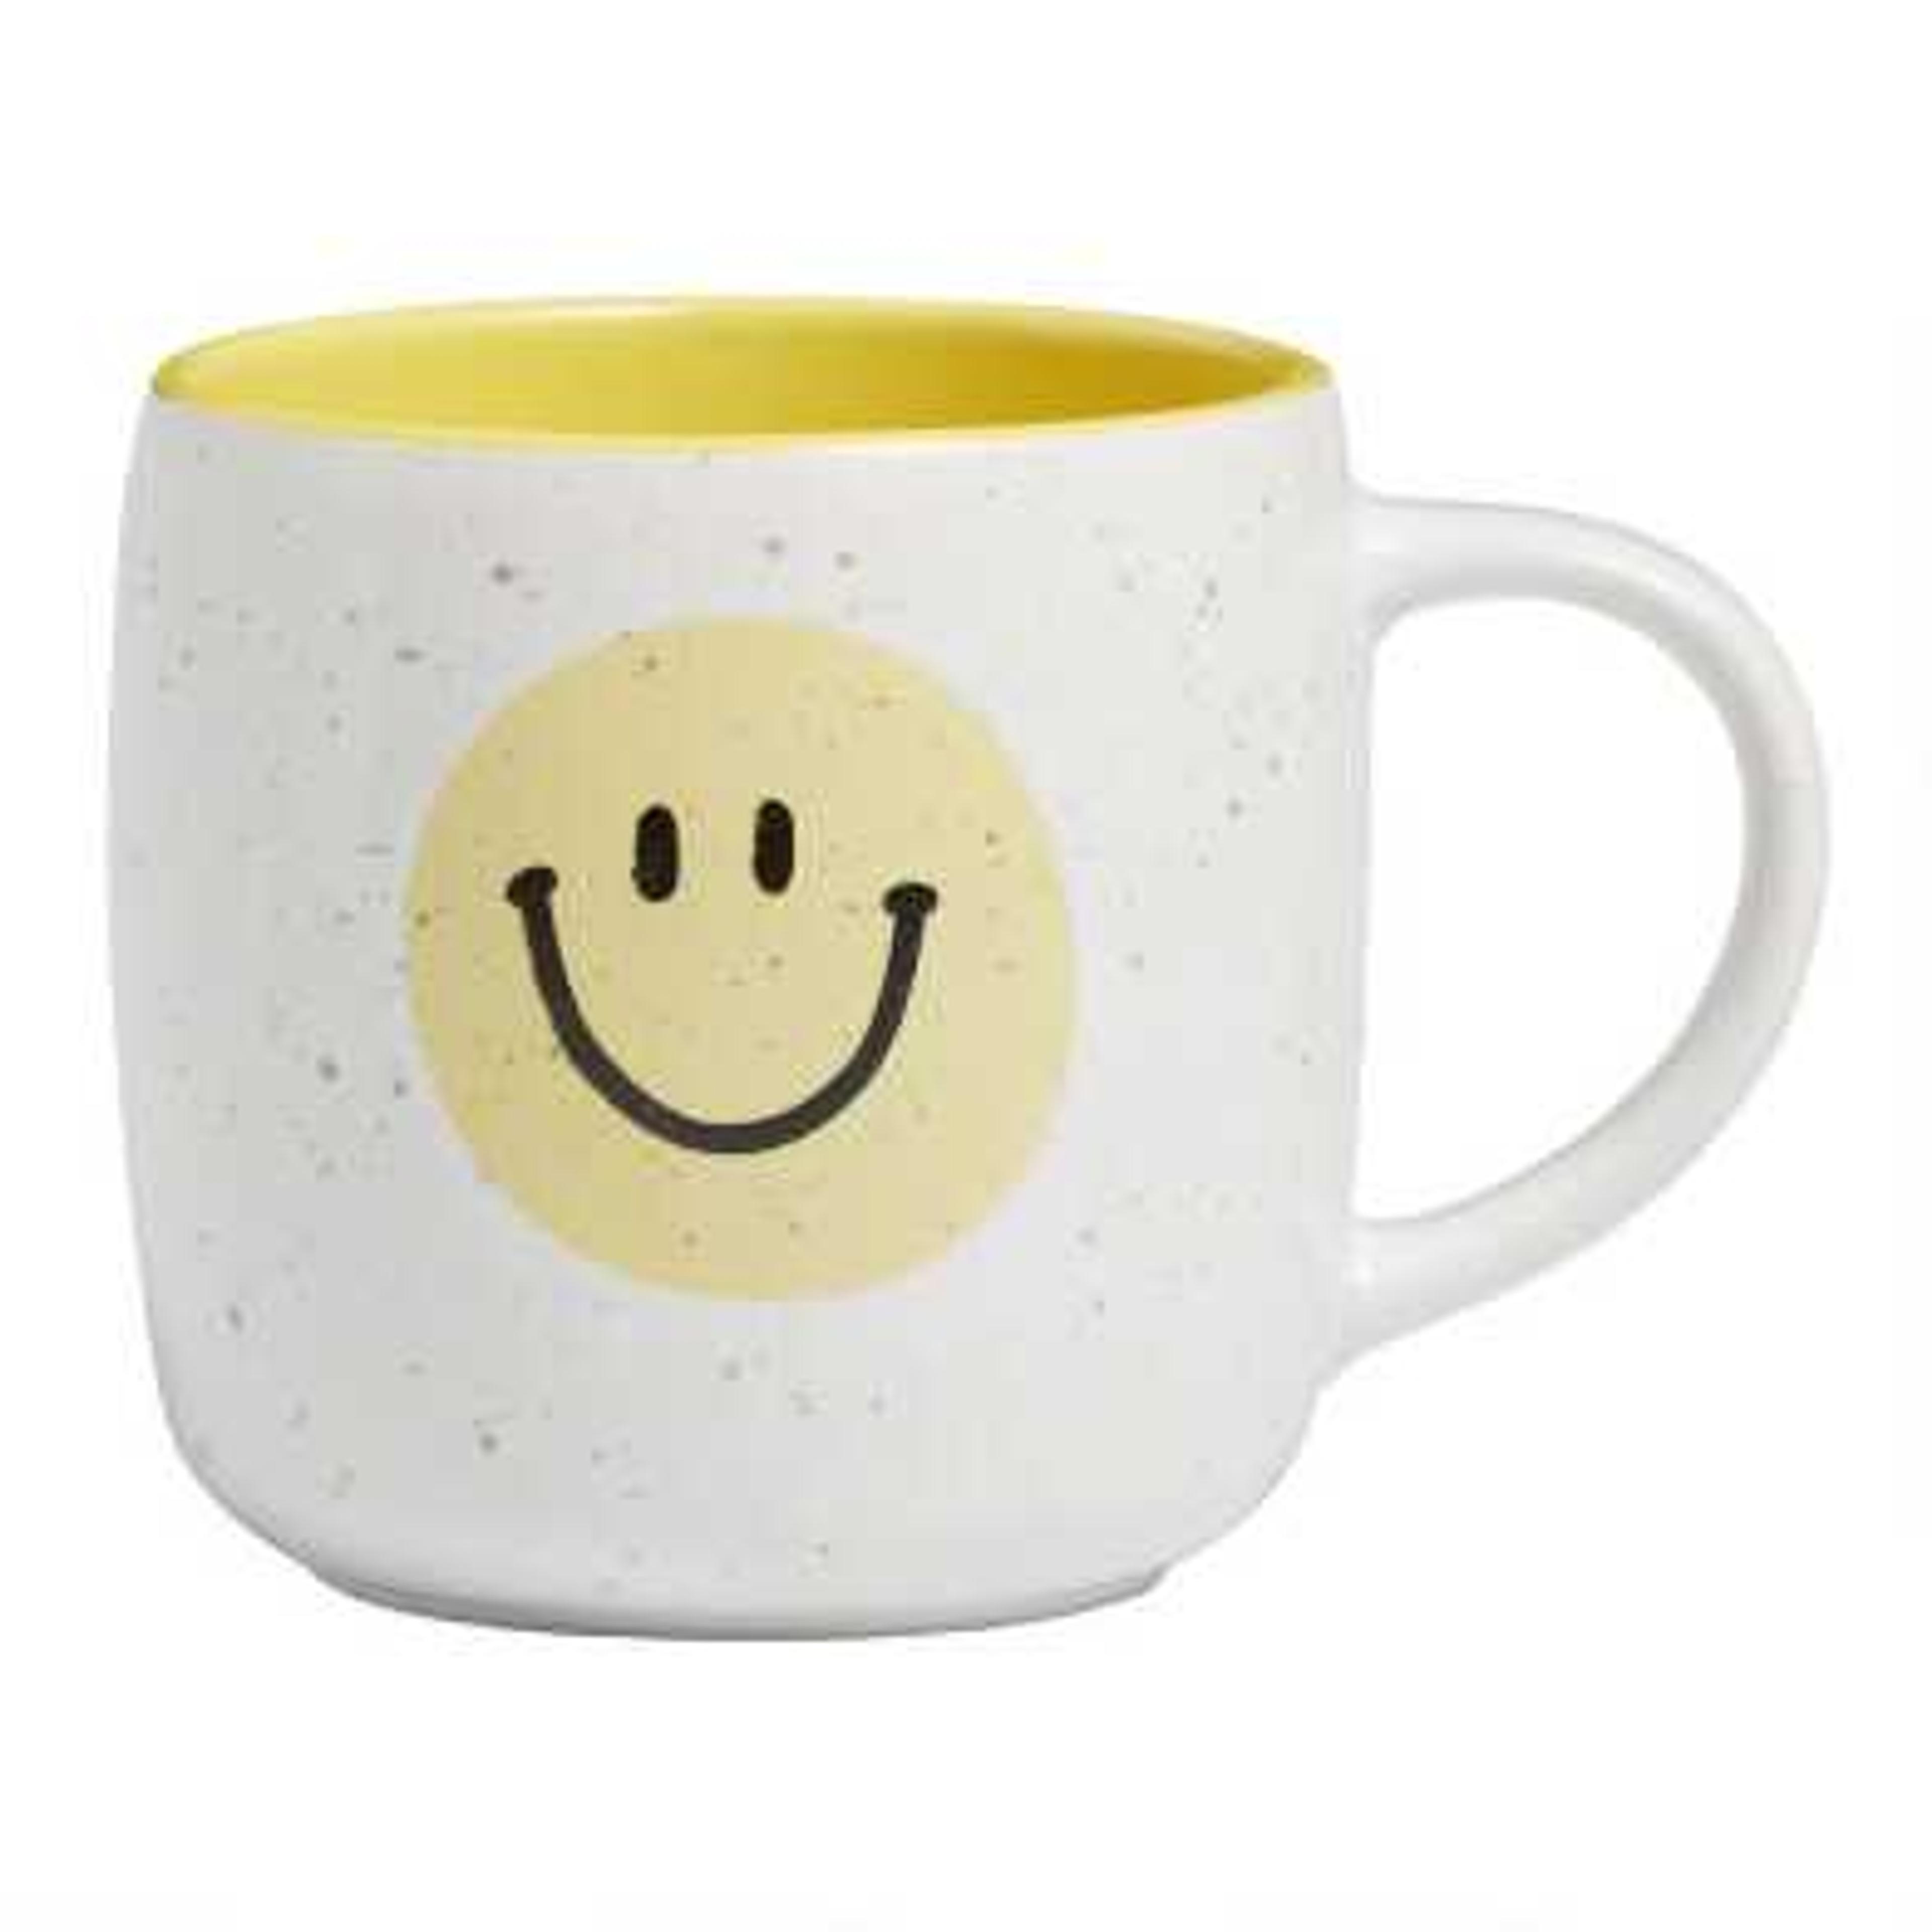 White and Yellow Speckled Smiley Face Mug | World Market